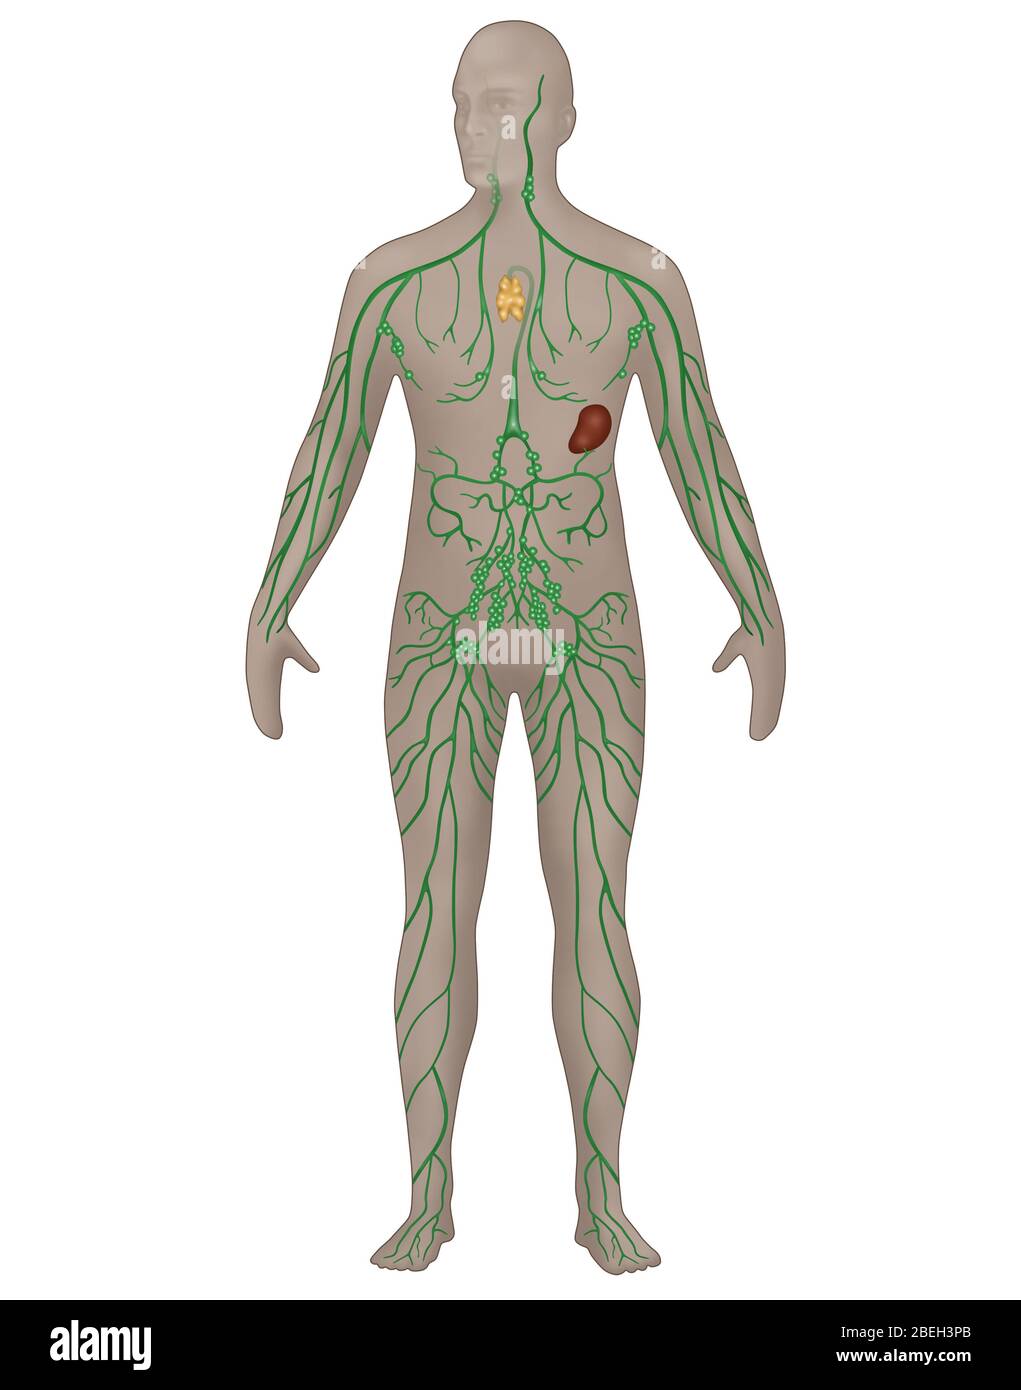 Lymphatic System in Male Anatomy Stock Photo